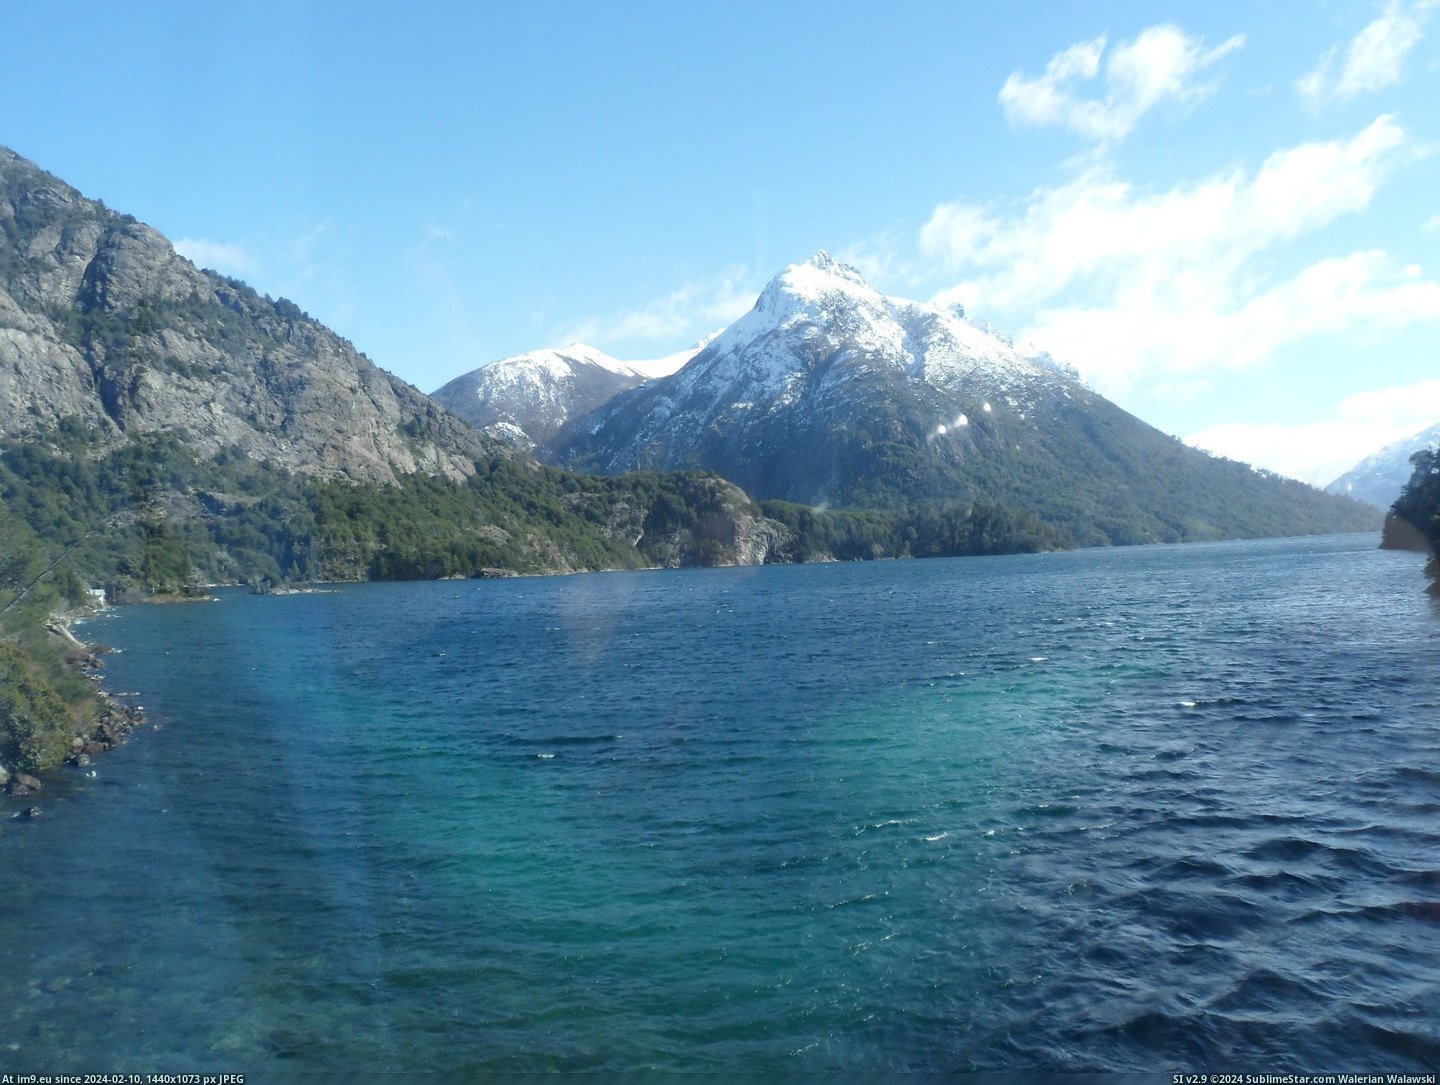 #High #School #Argentina #2592x1944 #Cellphone #Quality #Trip [Earthporn] Bariloche, Argentina  [2592x1944] (Taken from my high school trip, sorry about cellphone quality) Pic. (Image of album My r/EARTHPORN favs))